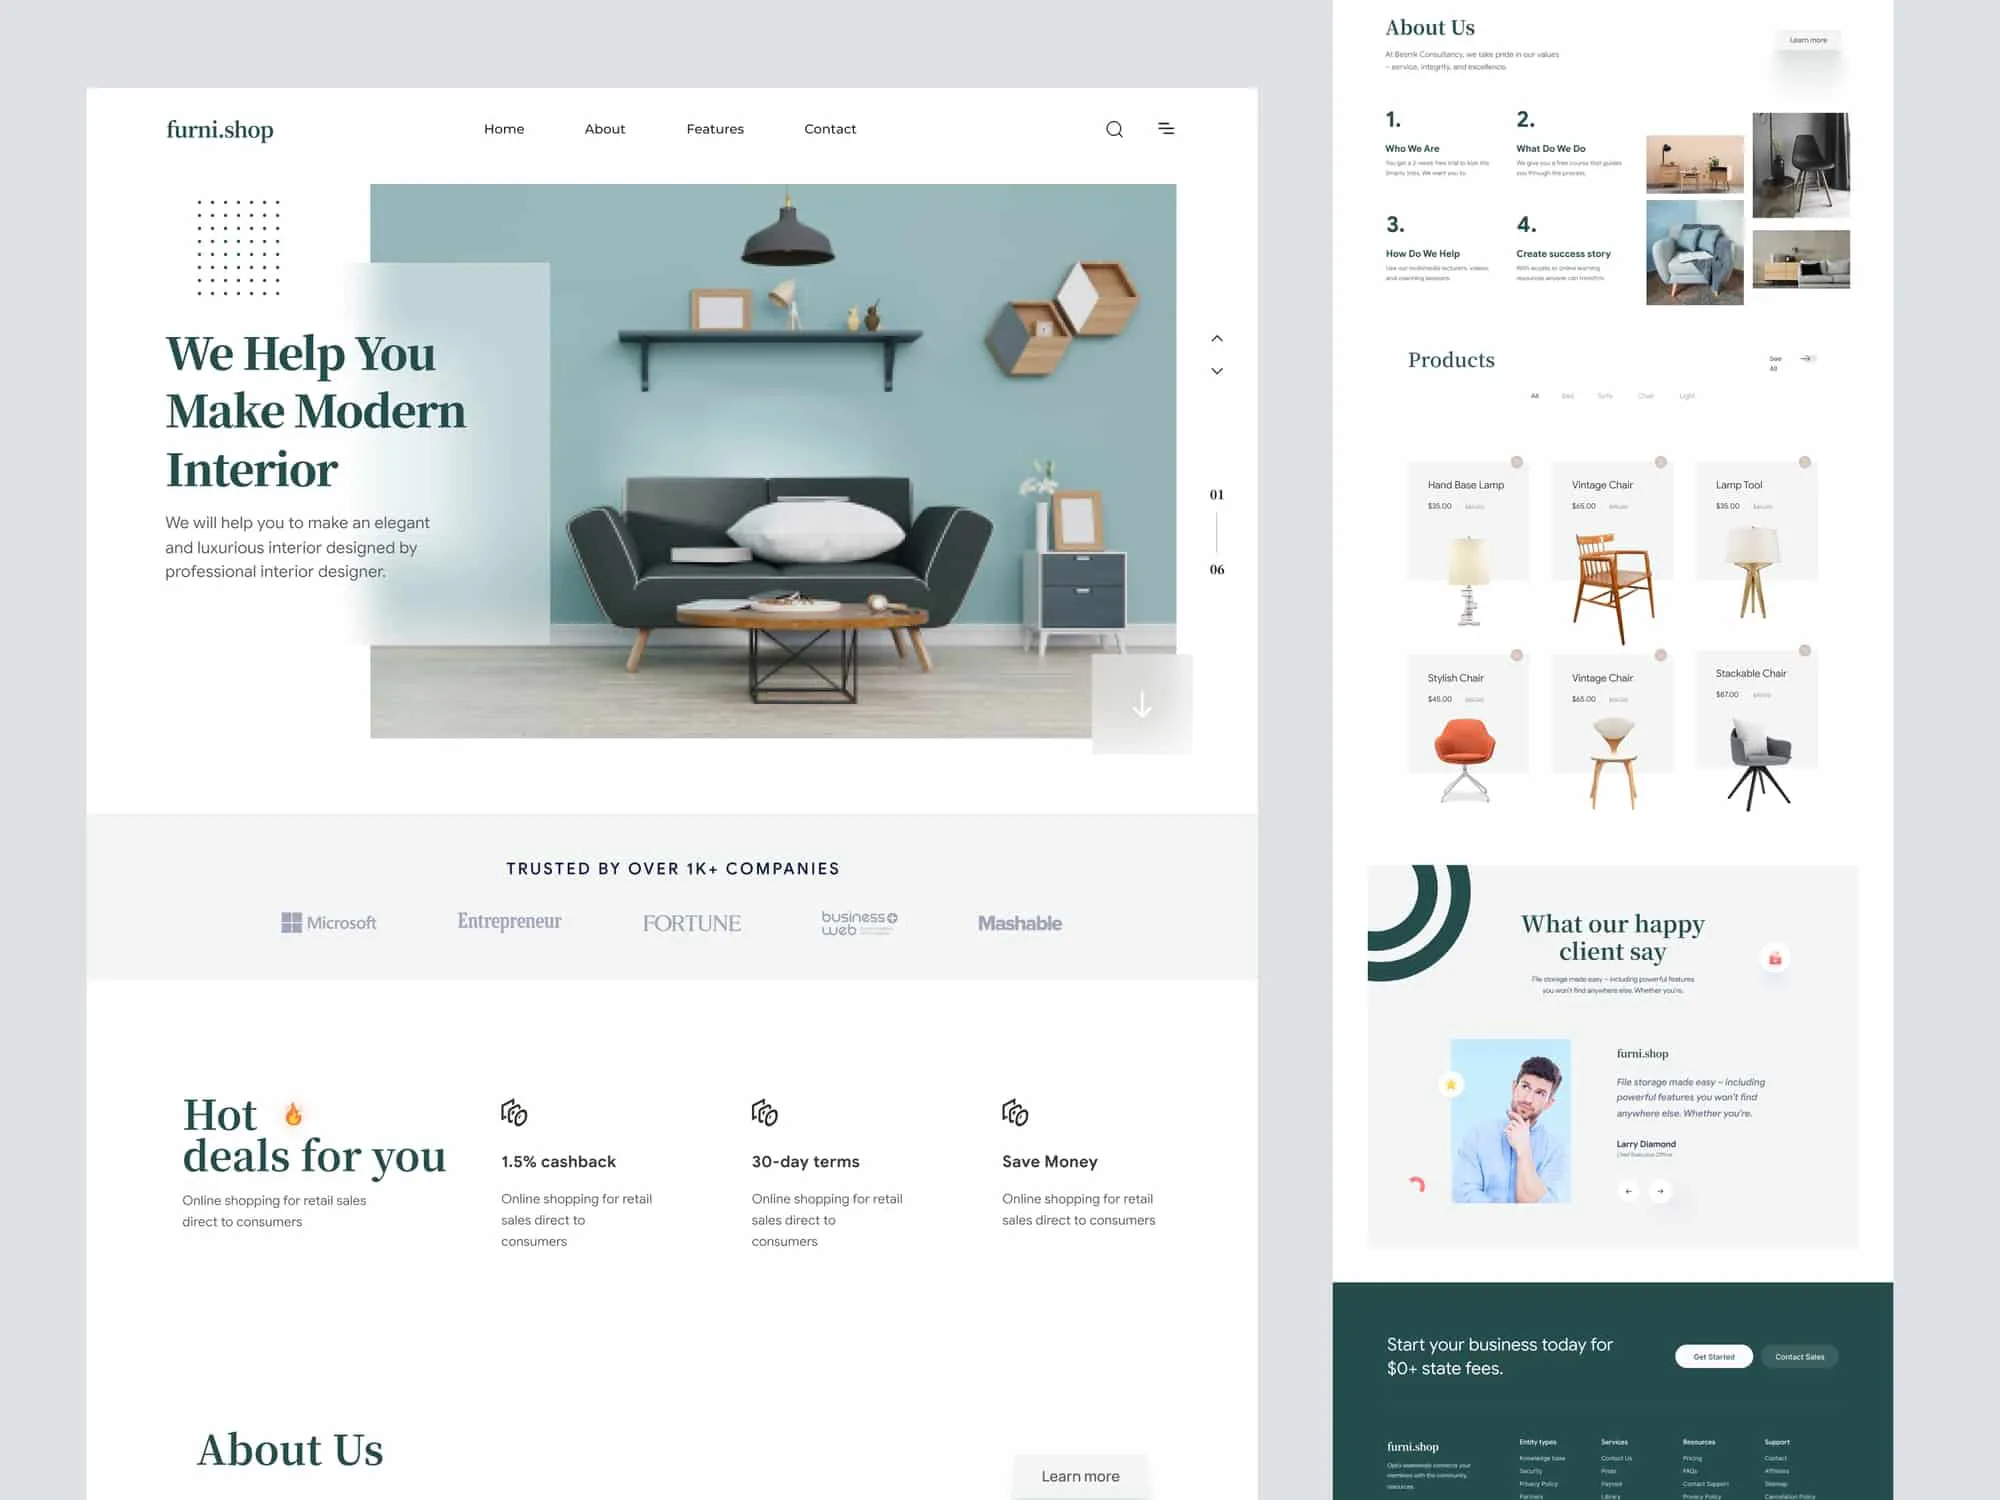 Ecommerce/Shopify Website Landing Page Design For Furniture Company  - Free Figma Template